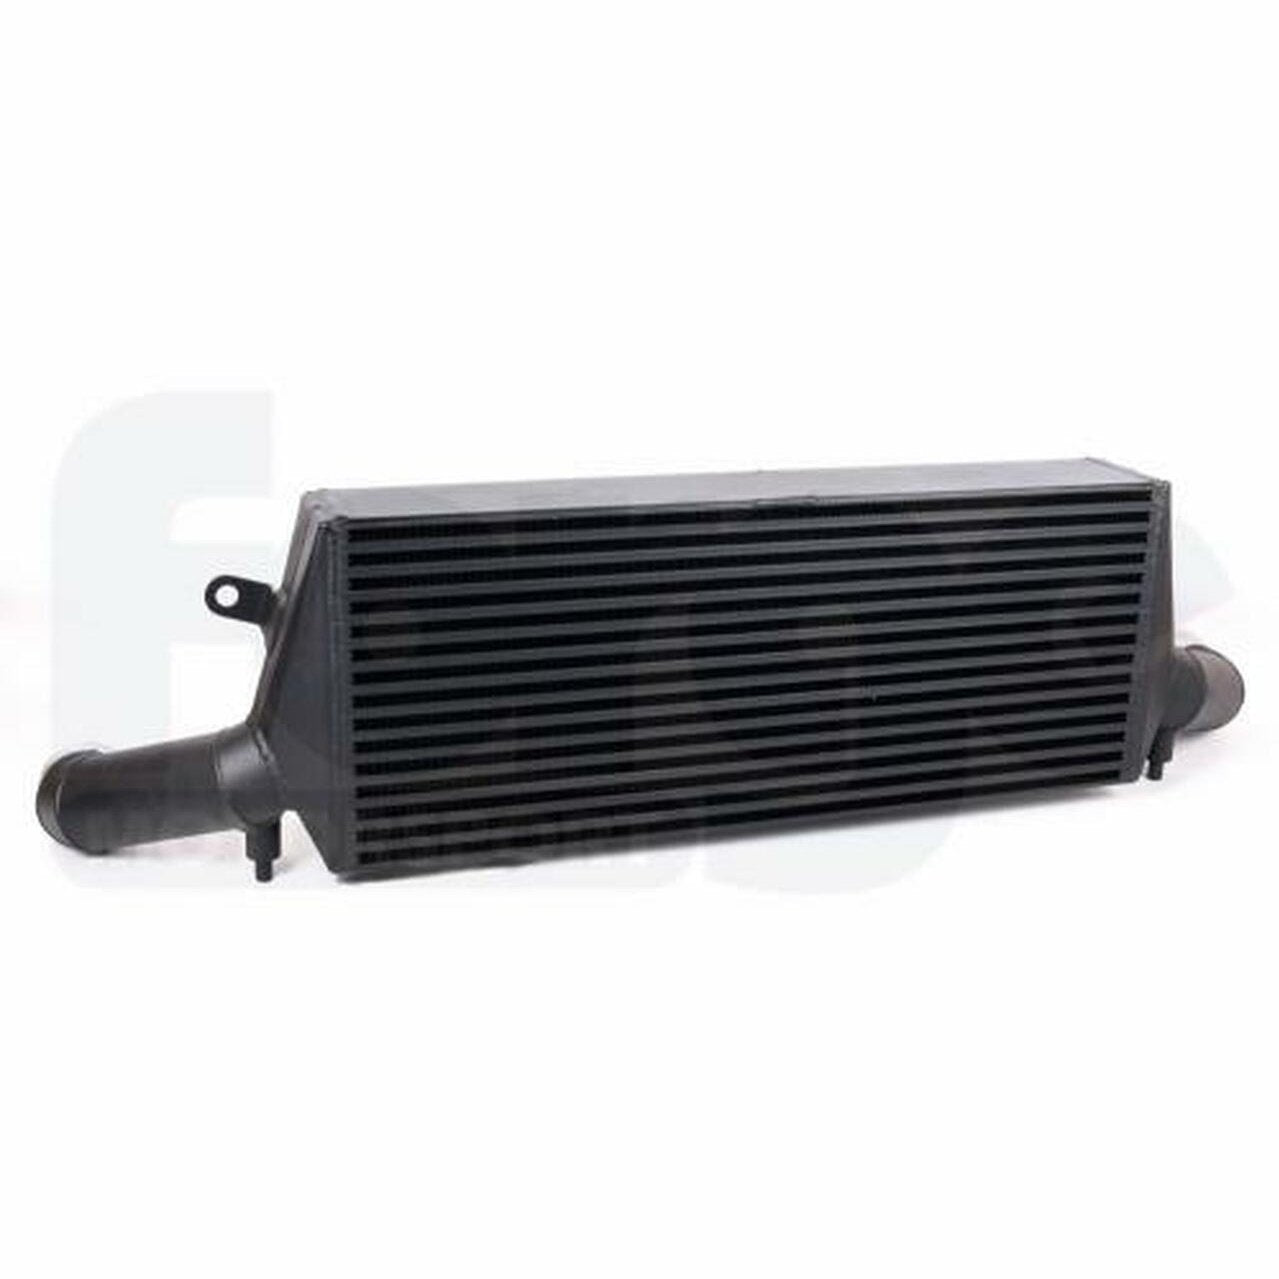 Forge Uprated Intercooler for the Audi